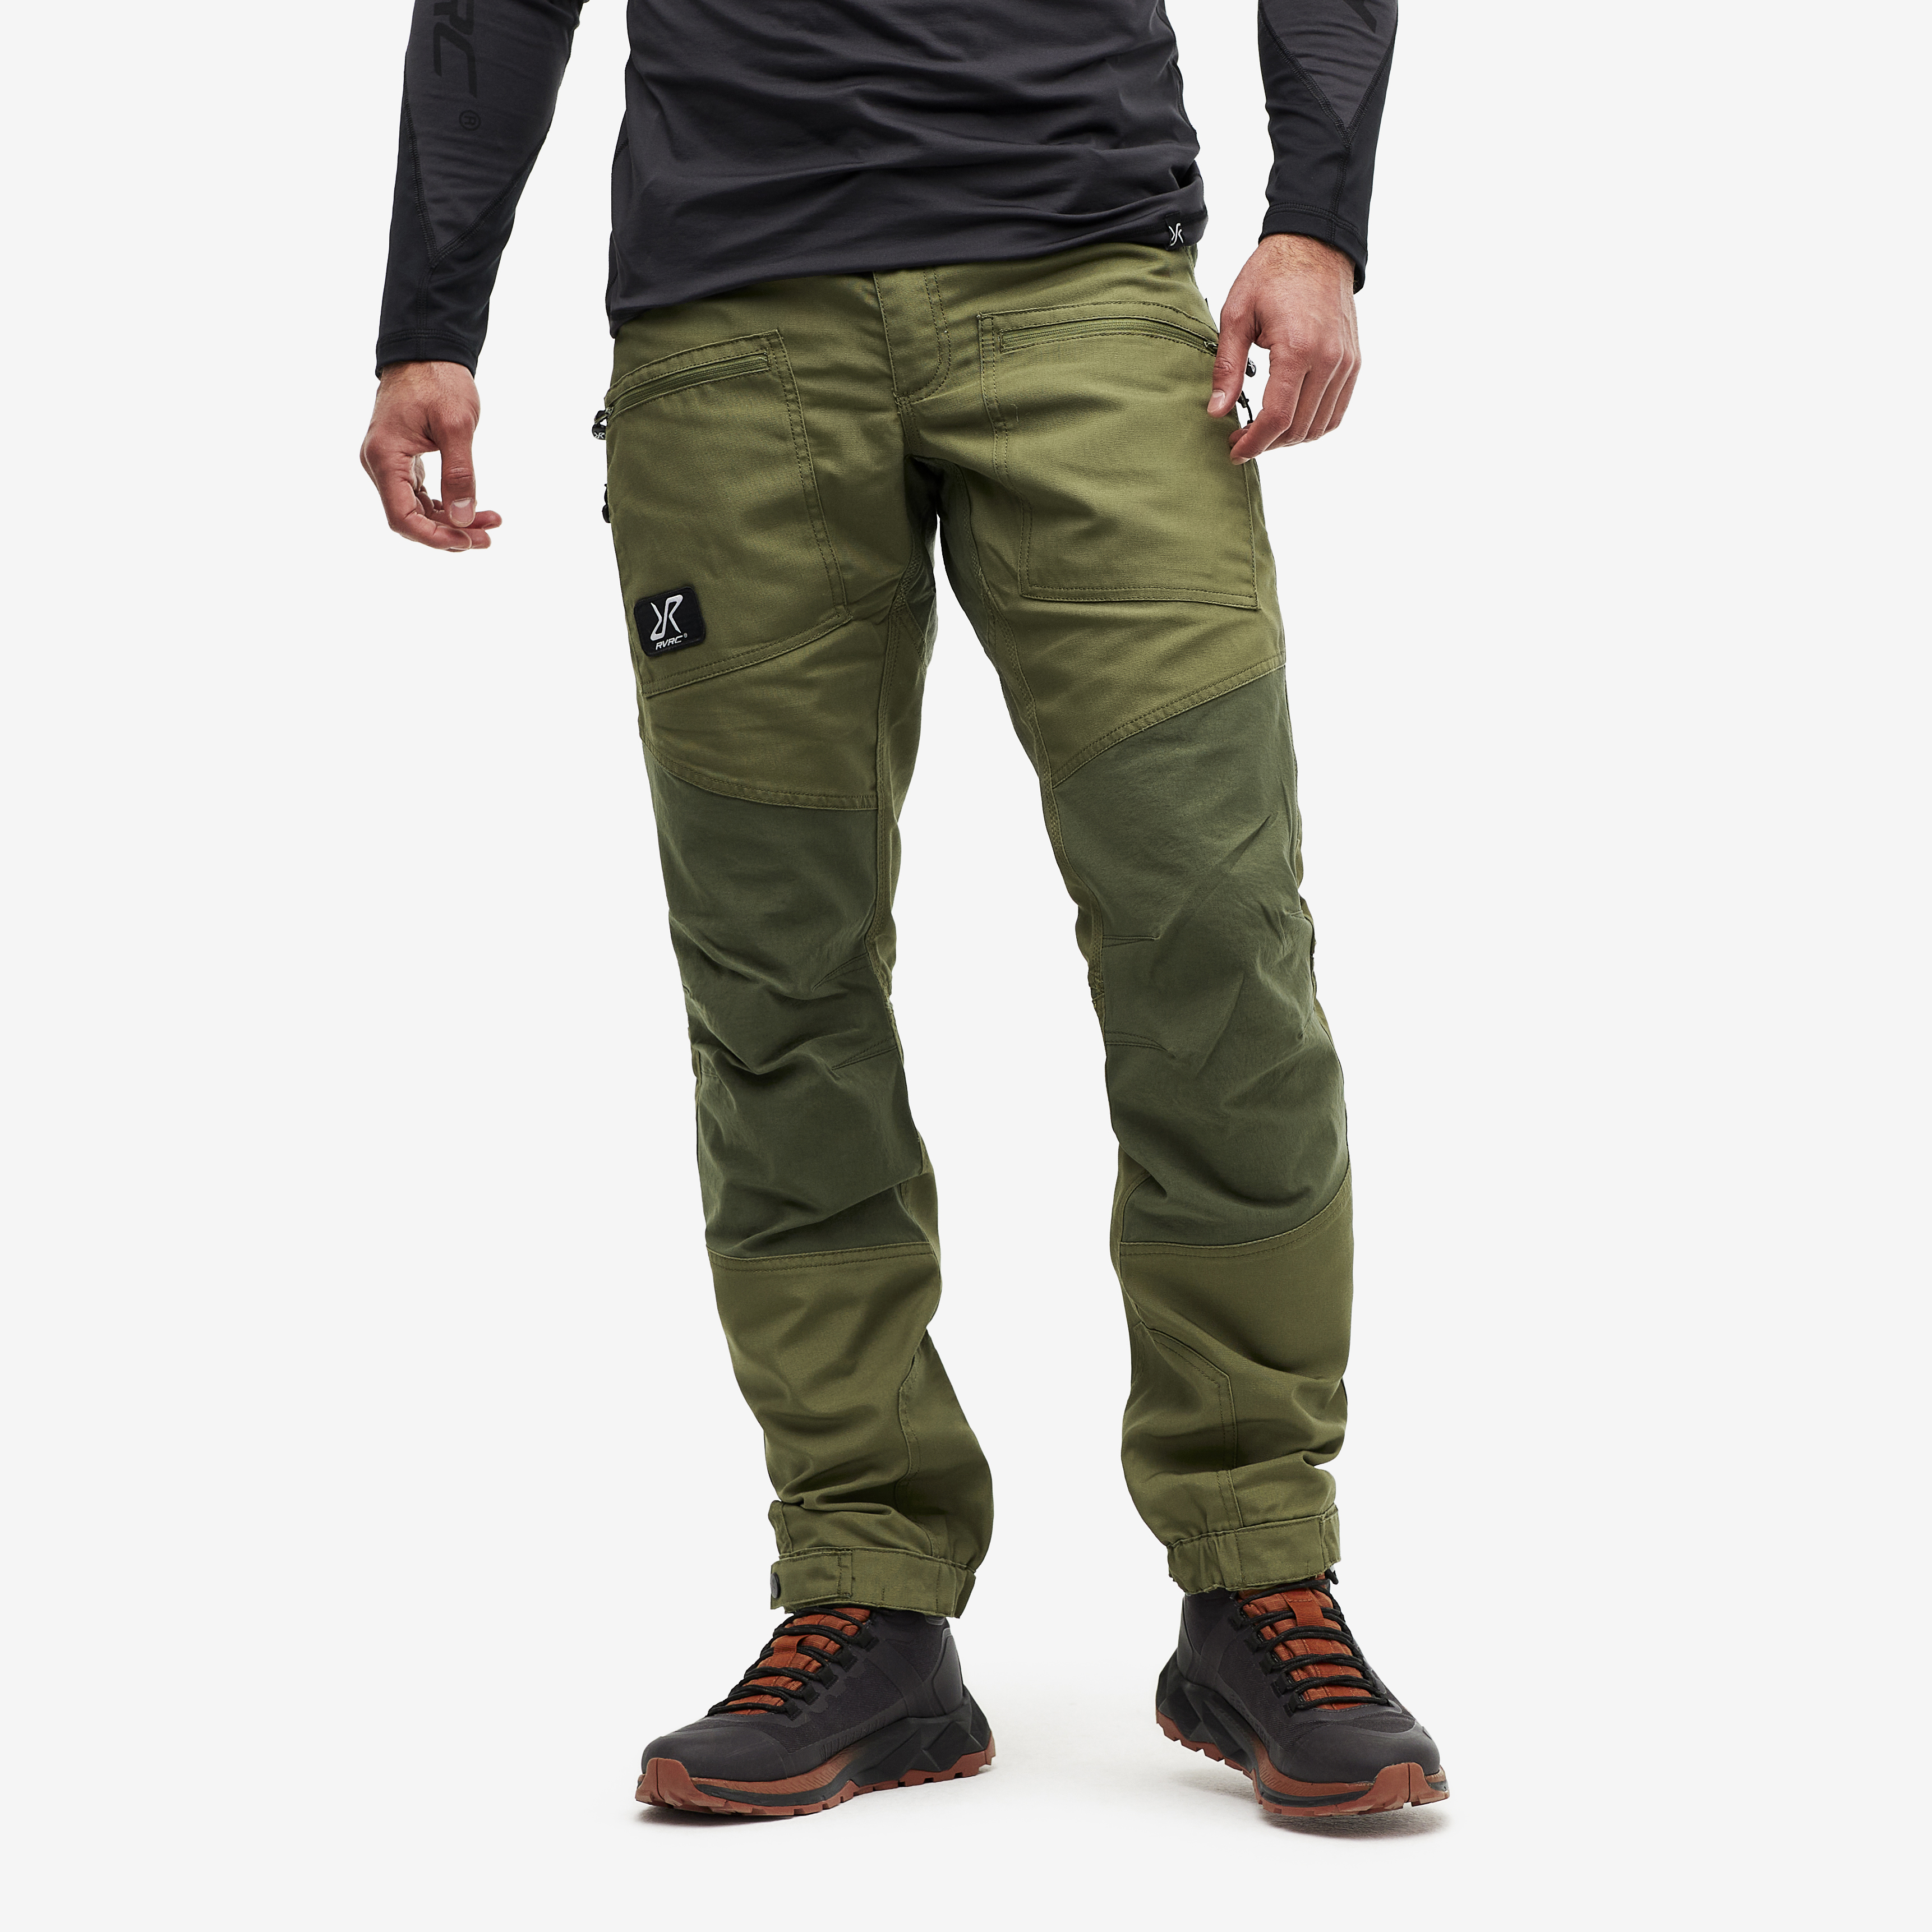 Nordwand Pro Pants Burnt Olive Homme